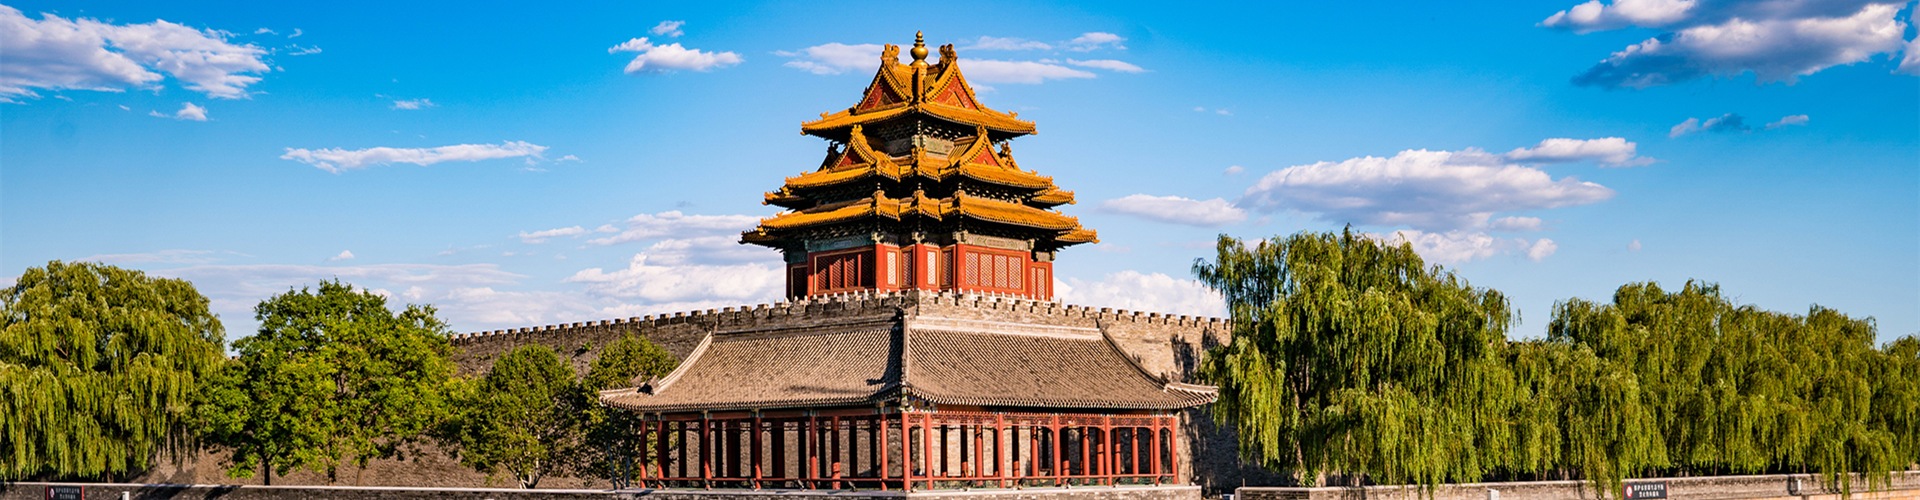 How to Visit the Forbidden City Without the Crowds